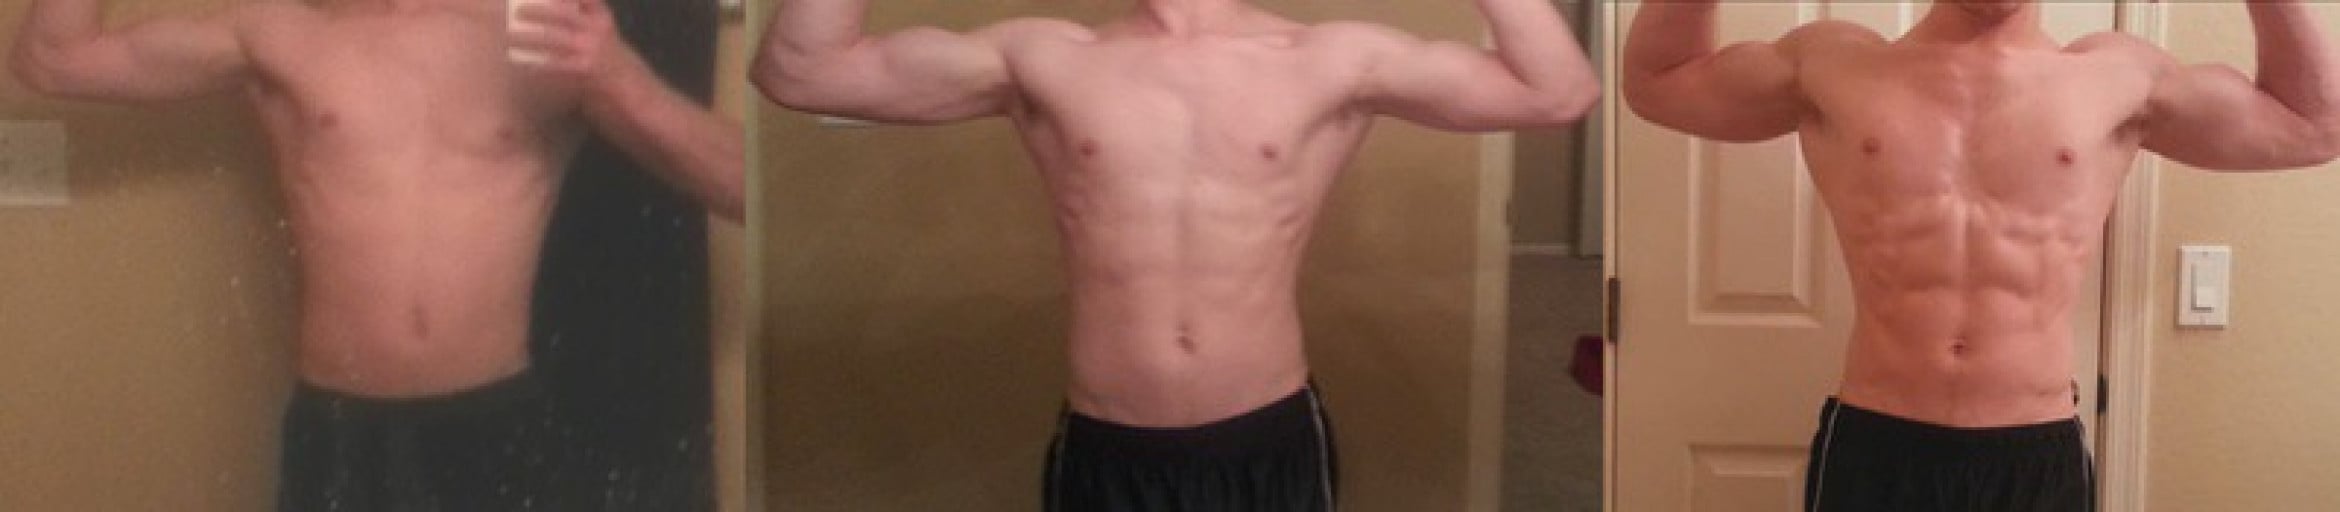 A picture of a 5'9" male showing a muscle gain from 112 pounds to 131 pounds. A total gain of 19 pounds.